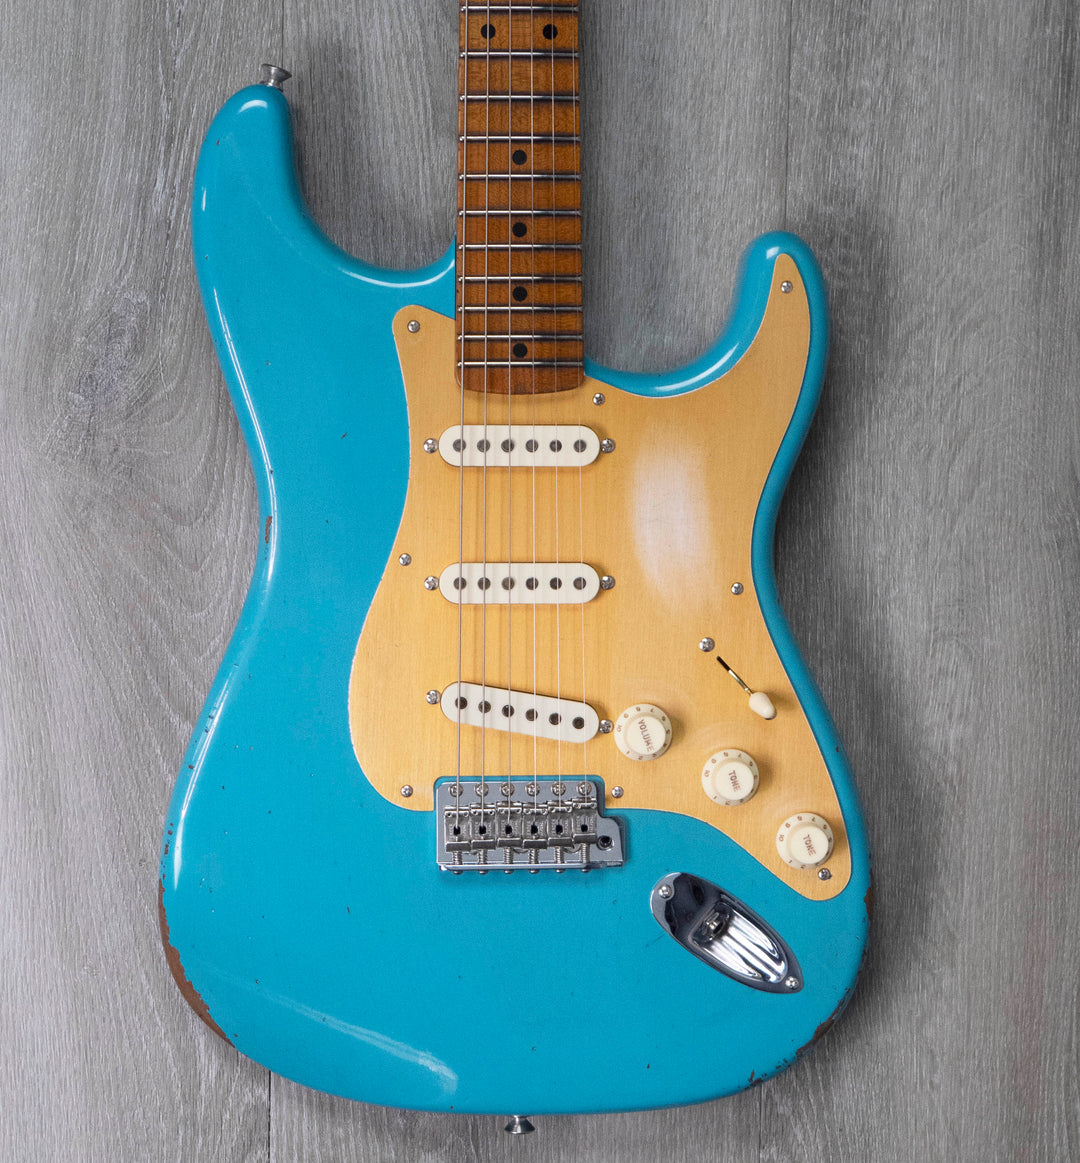 Fender Custom Shop Limited Edition Roasted 56 Stratocaster Relic, Faded Aged Taos Turquoise